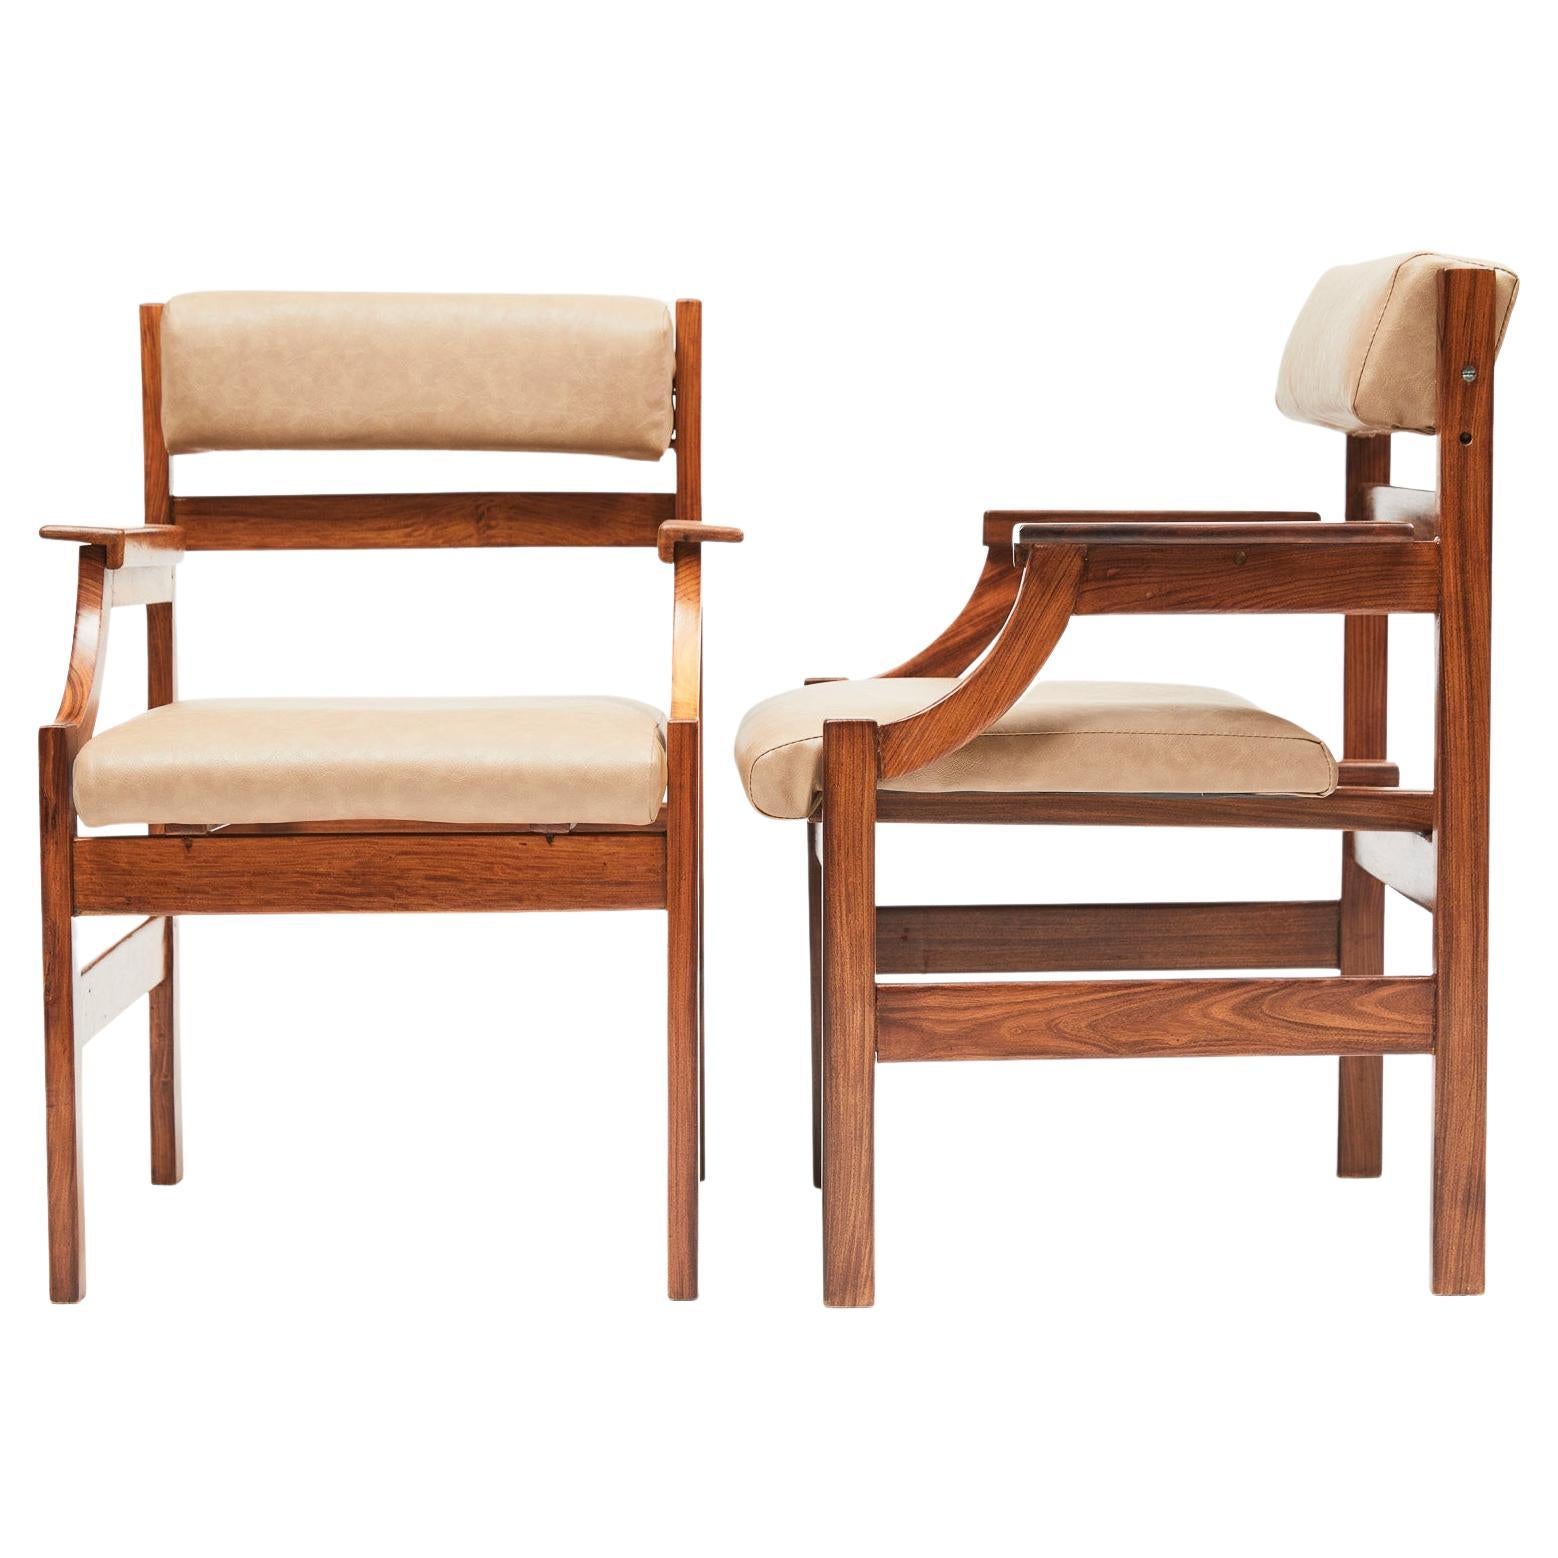 Available immediately, these Mid-Century Modern Armchairs in Hardwood & Faux Leather, are stunning!

The armchair structure has straight lines and is made entirely of Caviuna wood, a favorite one for designers like Giuseppe Scapinelli and Rino